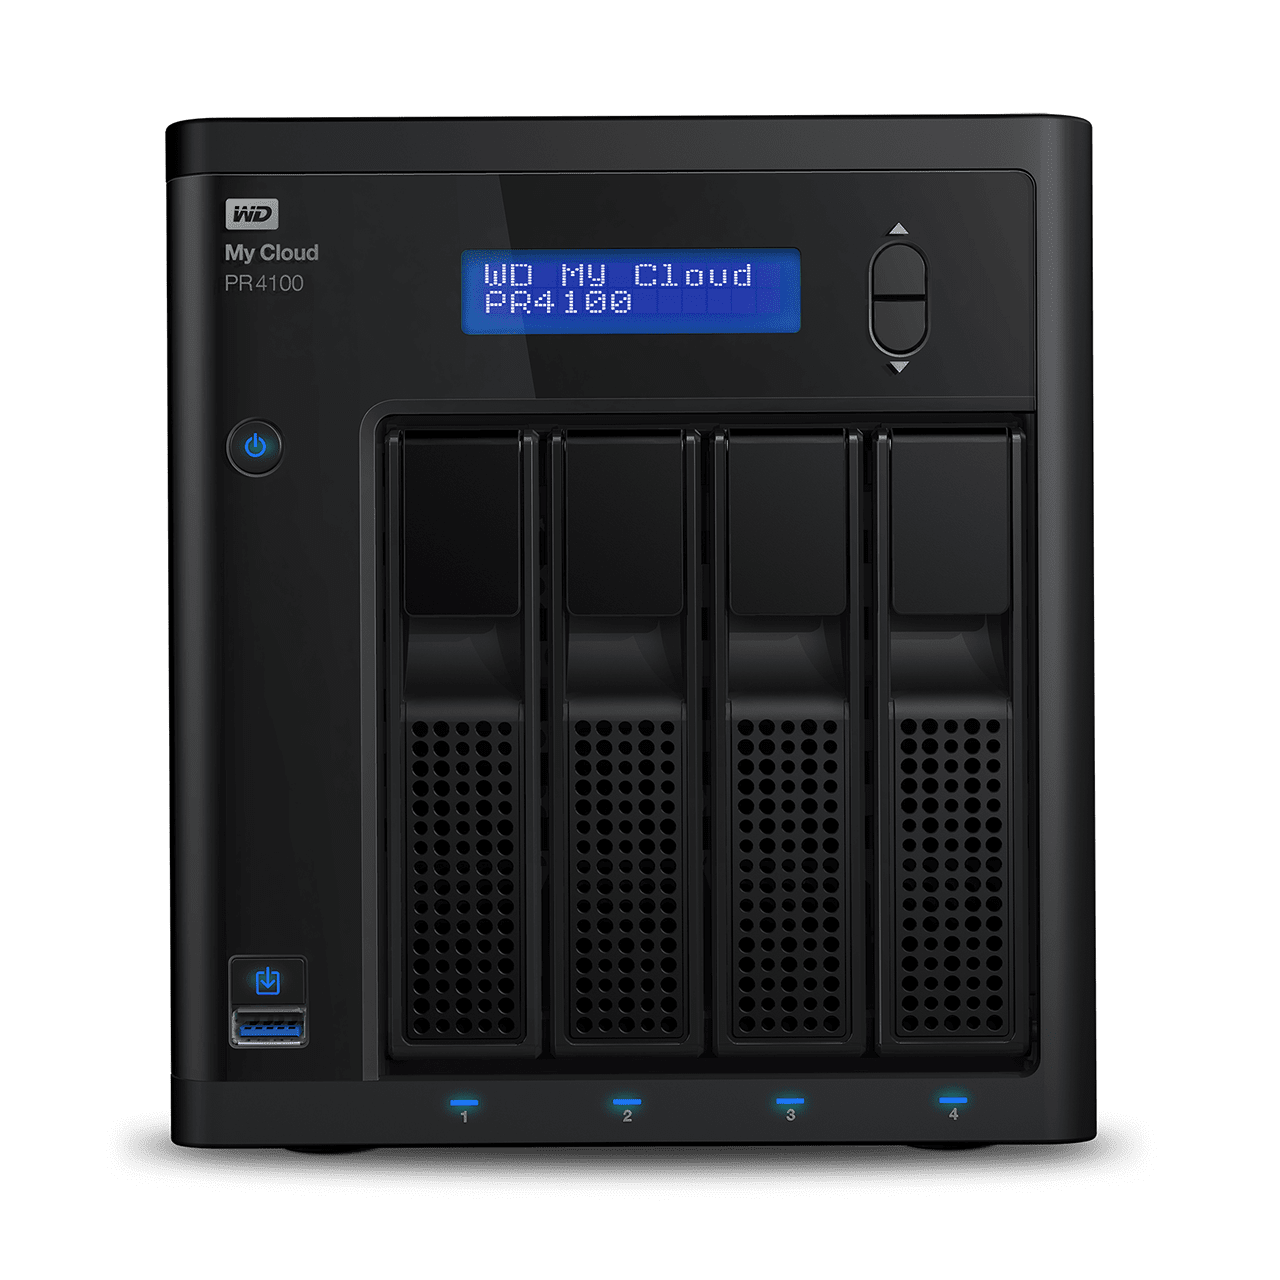 my-cloud-pro-series-pr4100-Front.png.thumb.1280.1280